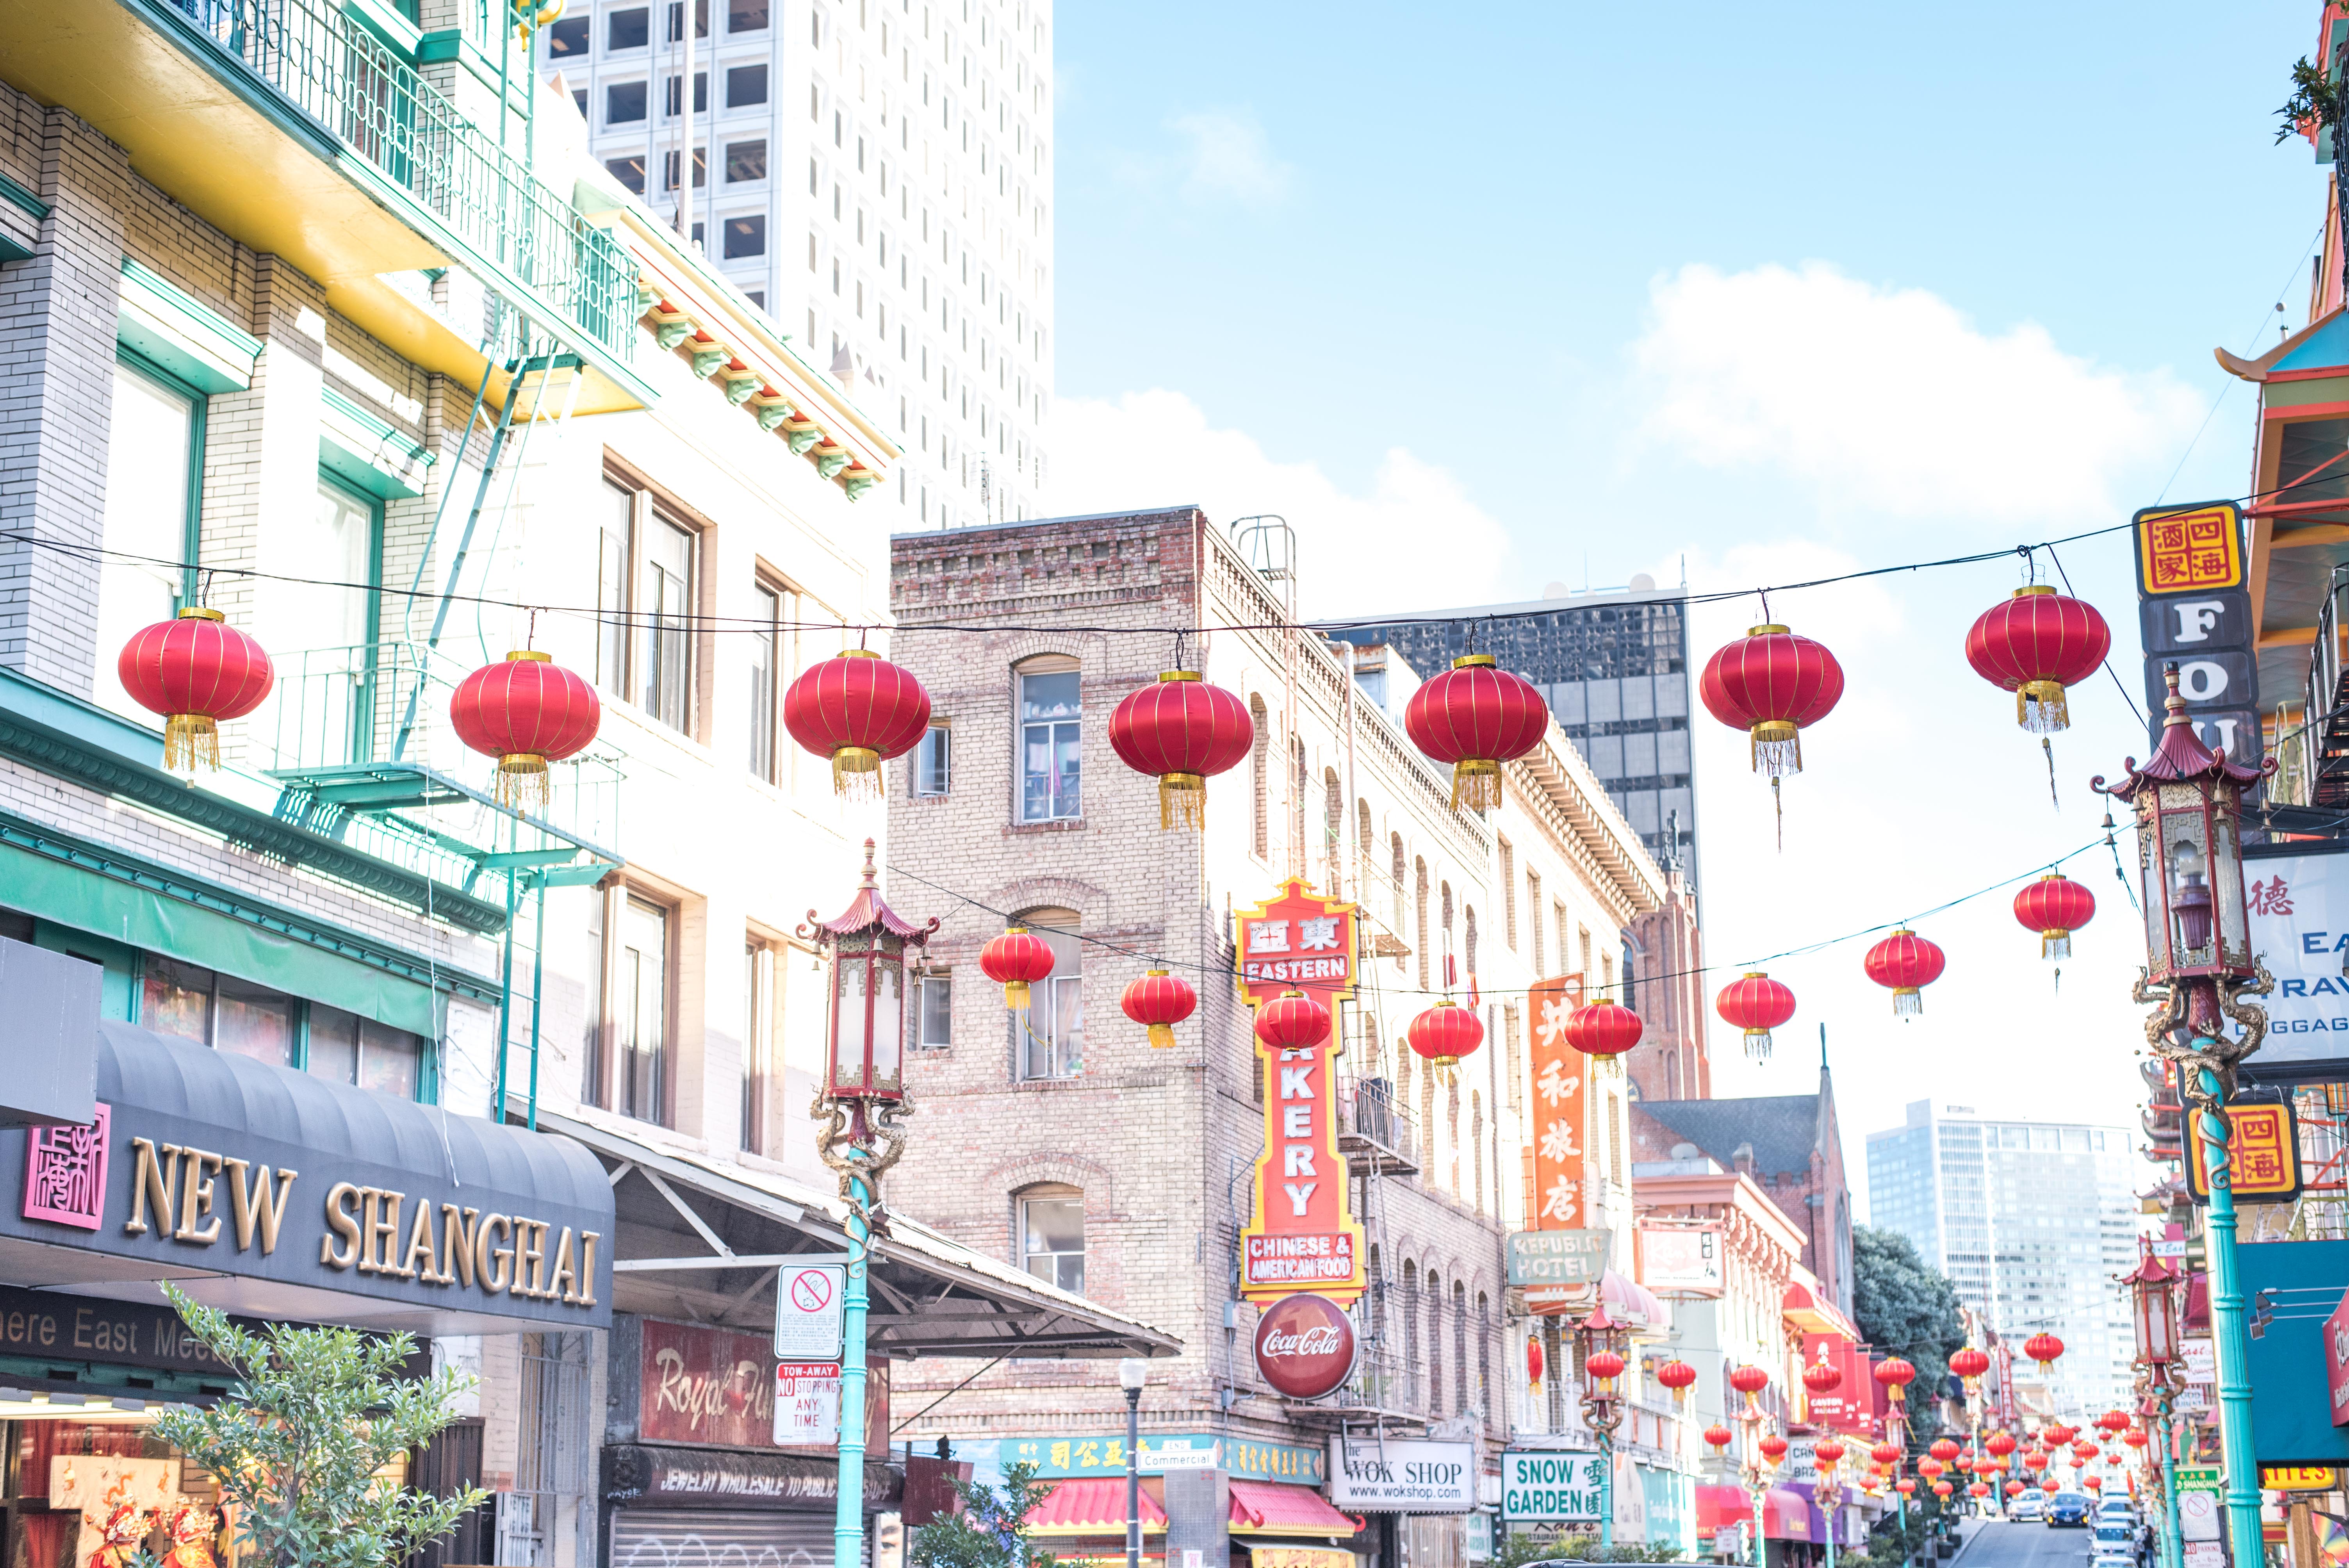 San Francisco Travel Guide - Chinatown